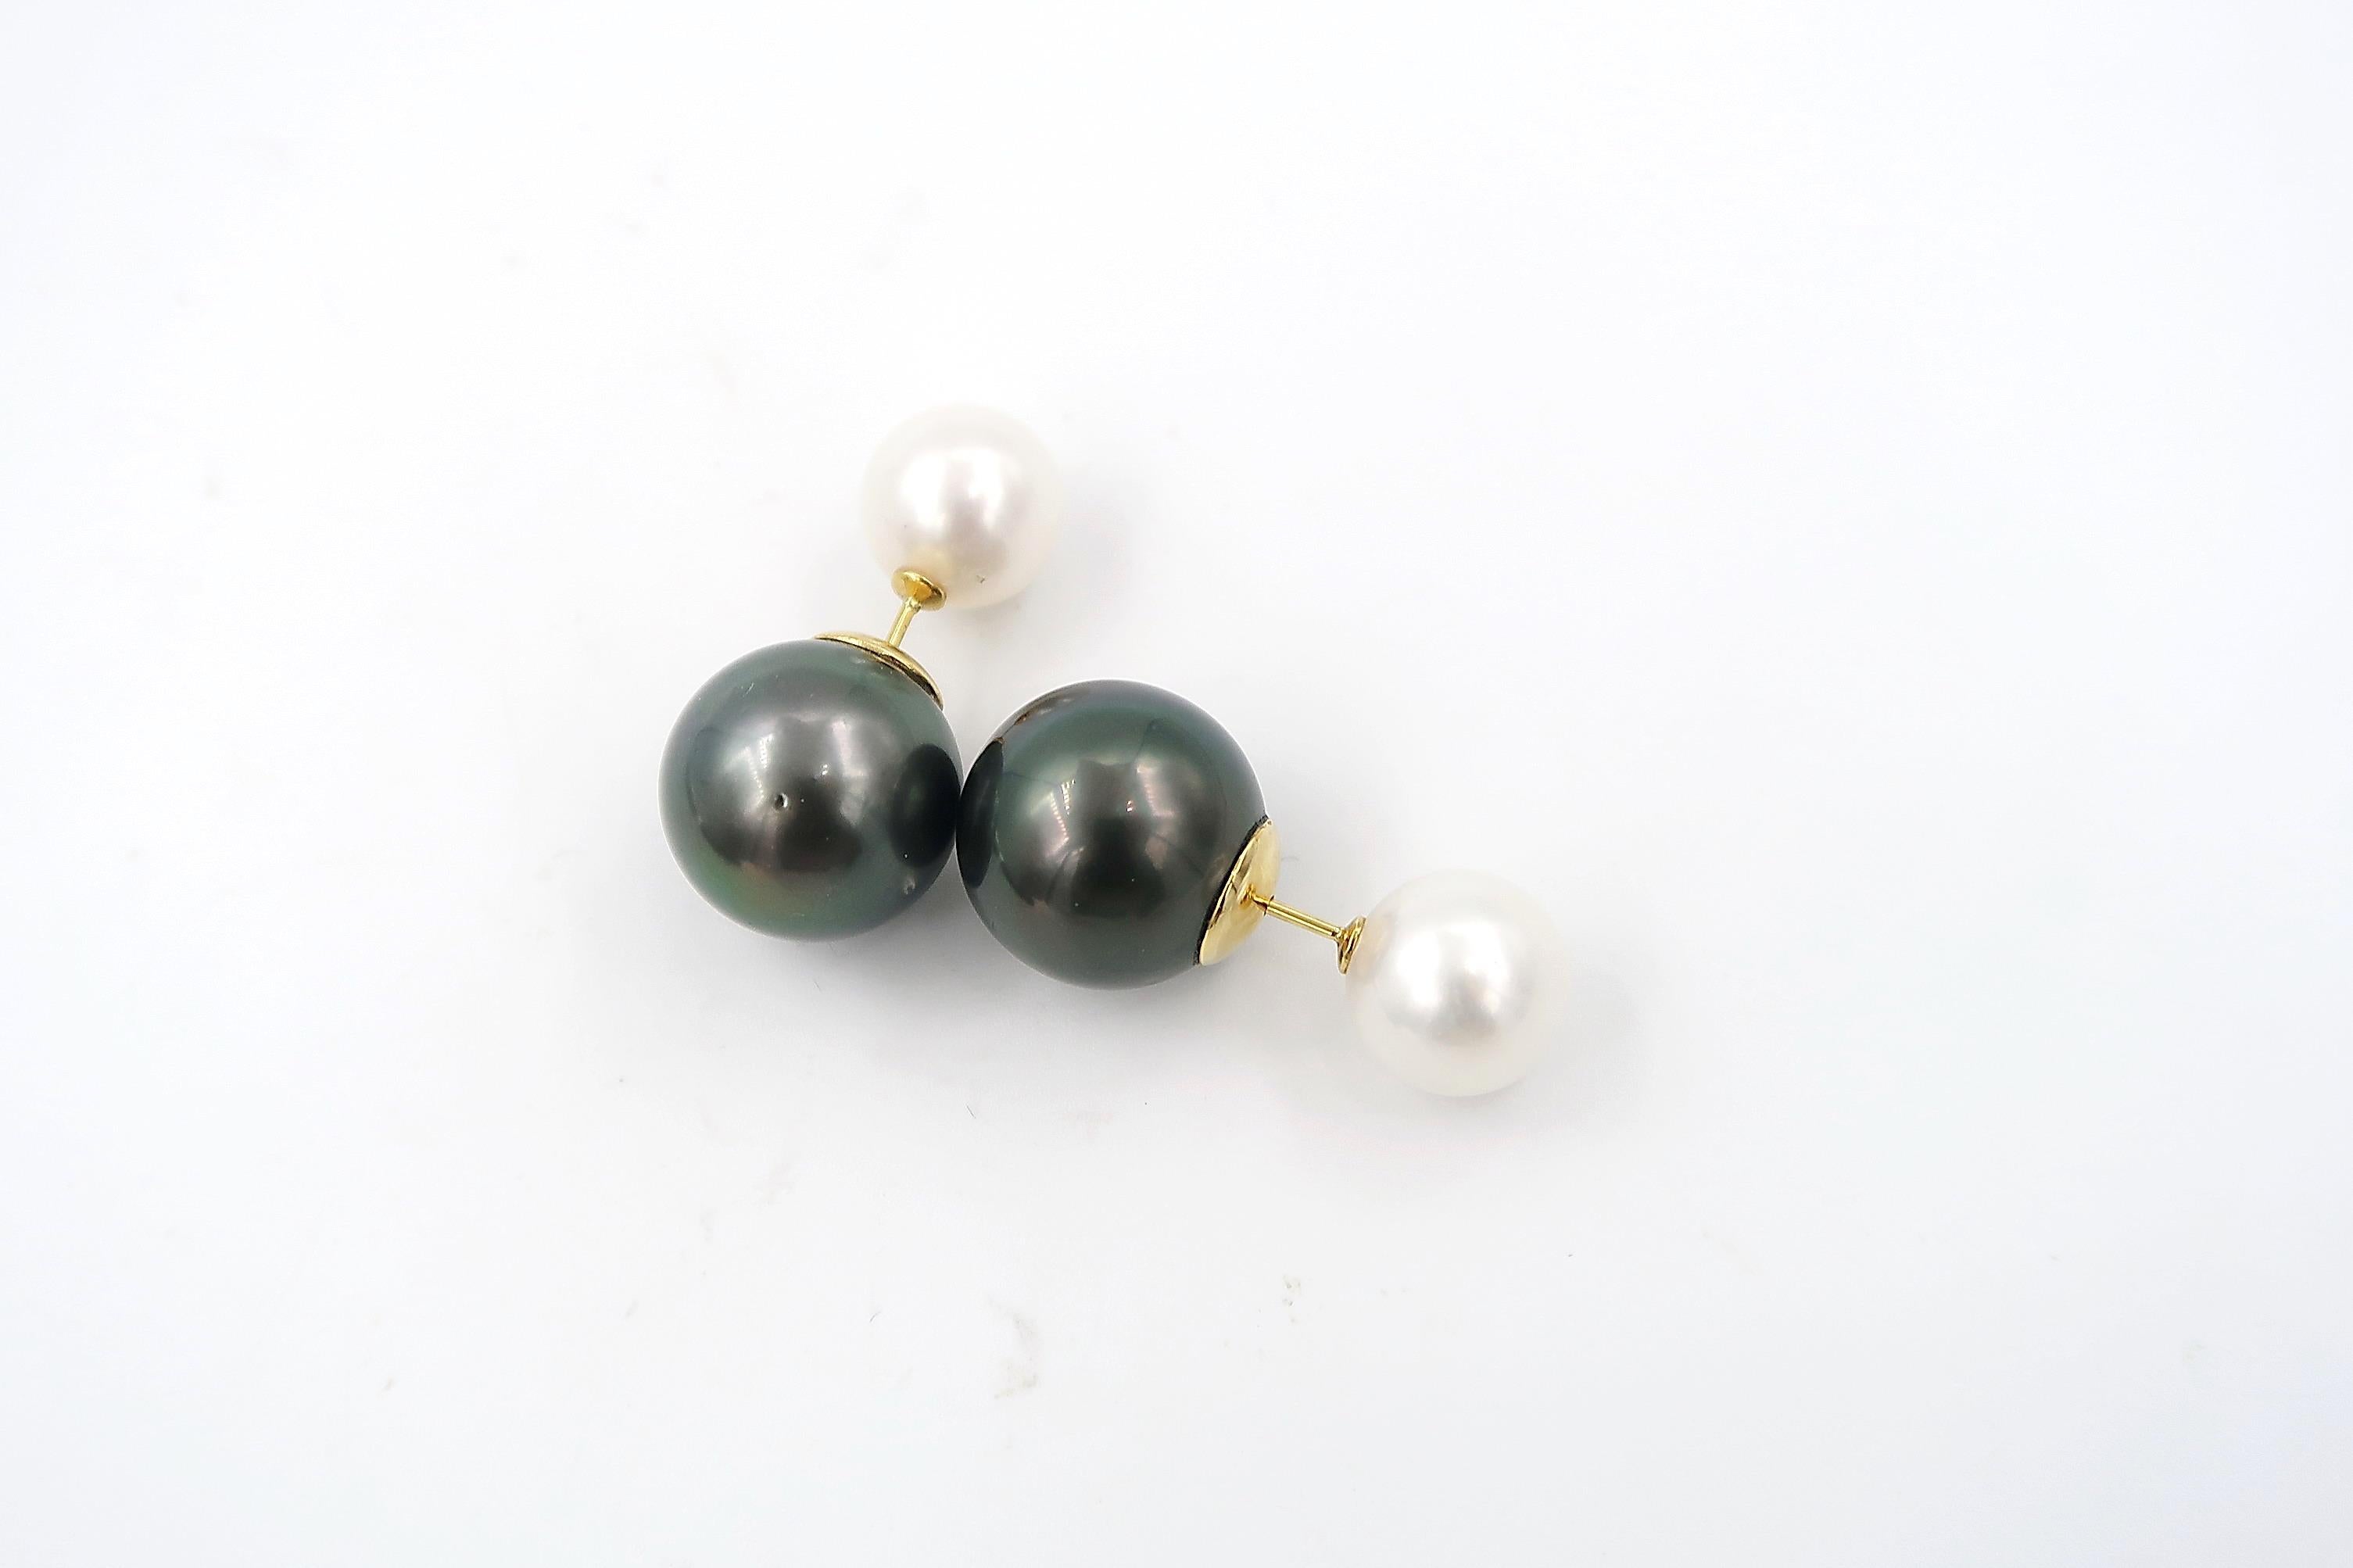 White South Sea Pearl and Tahitian Pearl Double Earrings in 18 Karat Yellow Gold

Gold: 18K 4.58g.
White South Sea Pearls: Approx. 11.5mm. 2 pcs.
Tahitian Pearls: Approx. 15.25mm. 2 pcs.